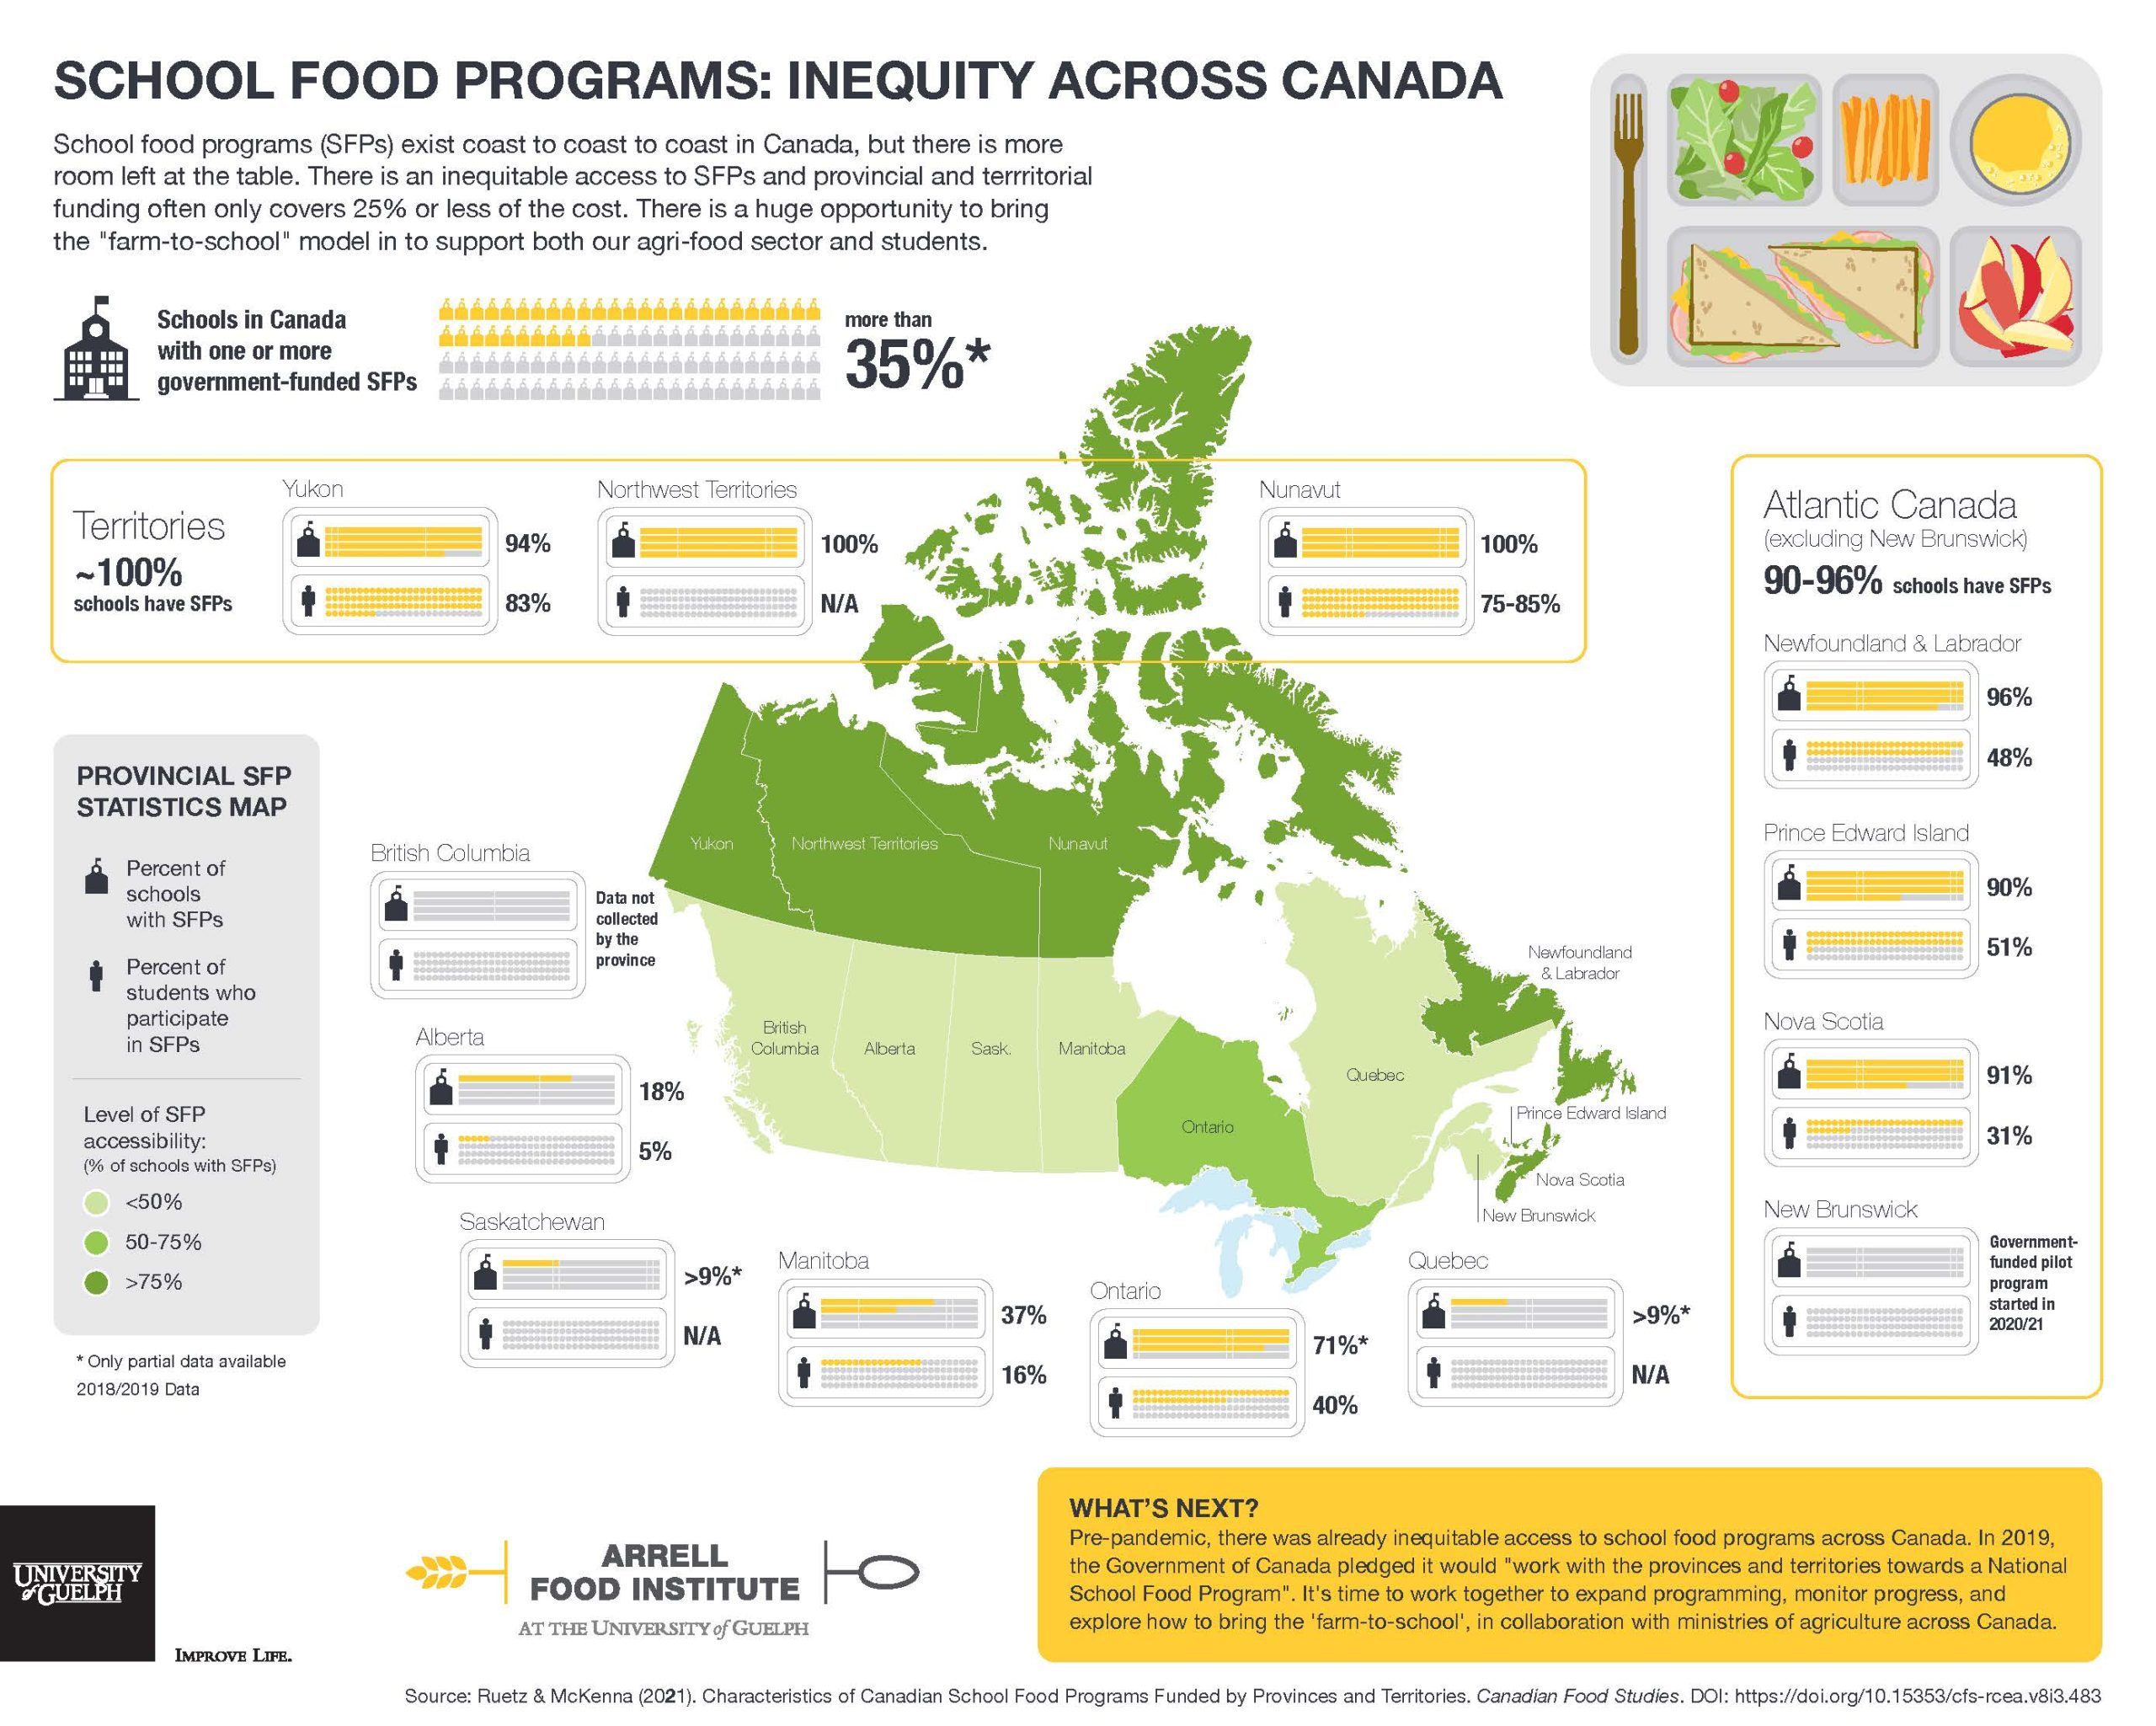 Infographic titled "SCHOOL FOOD PROGRAMS: INEQUITY ACROSS CANADA" and concluding that "School food programs (SFPs) exist coast to coast to coast in Canada, but there is more room left at the table. There is an inequitable access to SFPs and provincial and terrritorial funding often only covers 25% or less of the cost. There is a huge opportunity to bring the "farm-to-school" model in to support both our agri-food sector and students."